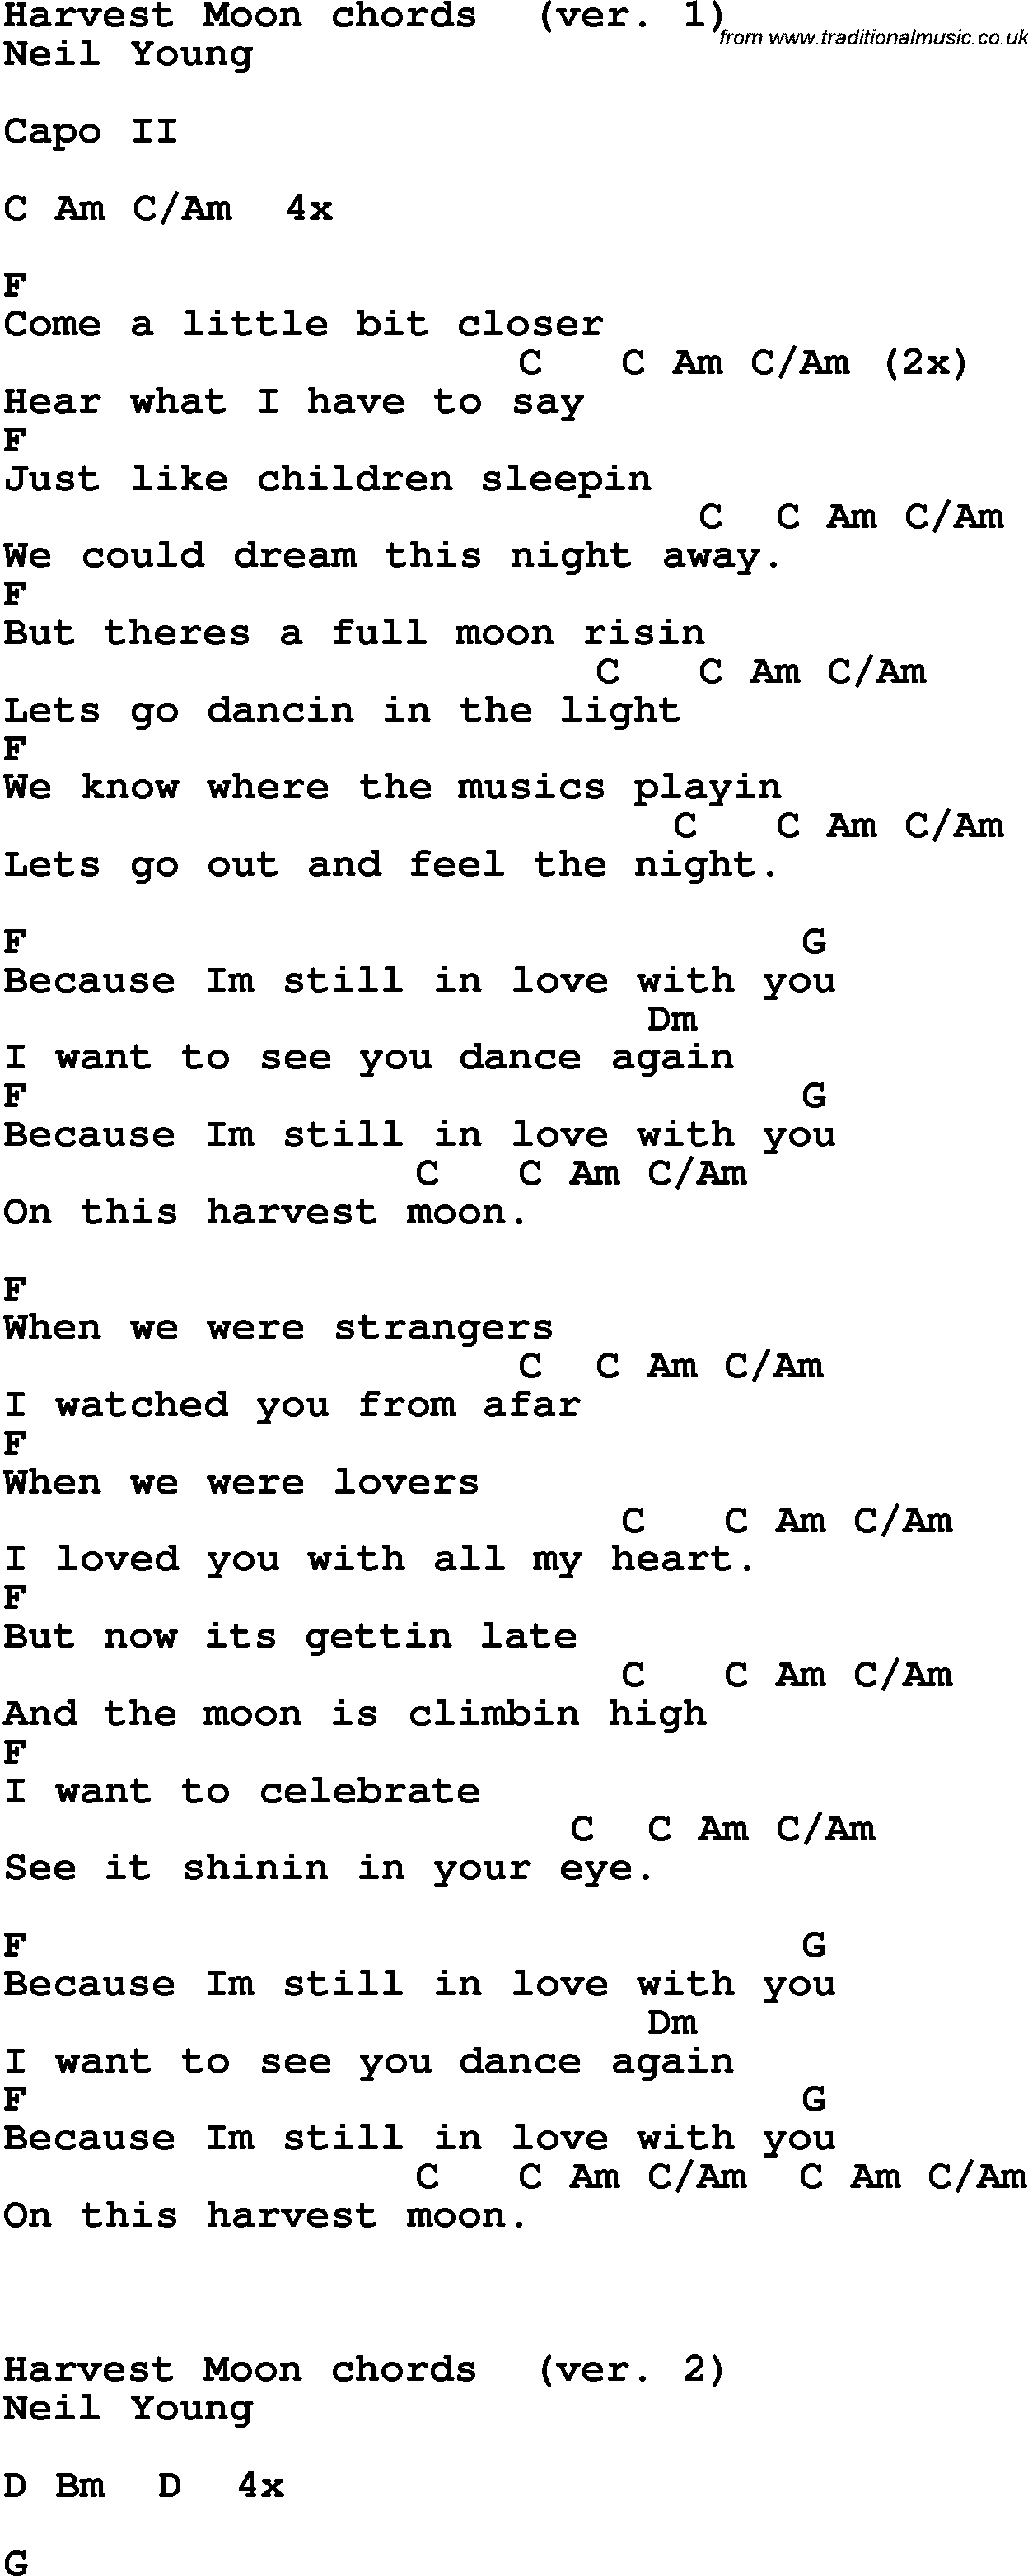 Song Lyrics with guitar chords for Harvest Moon